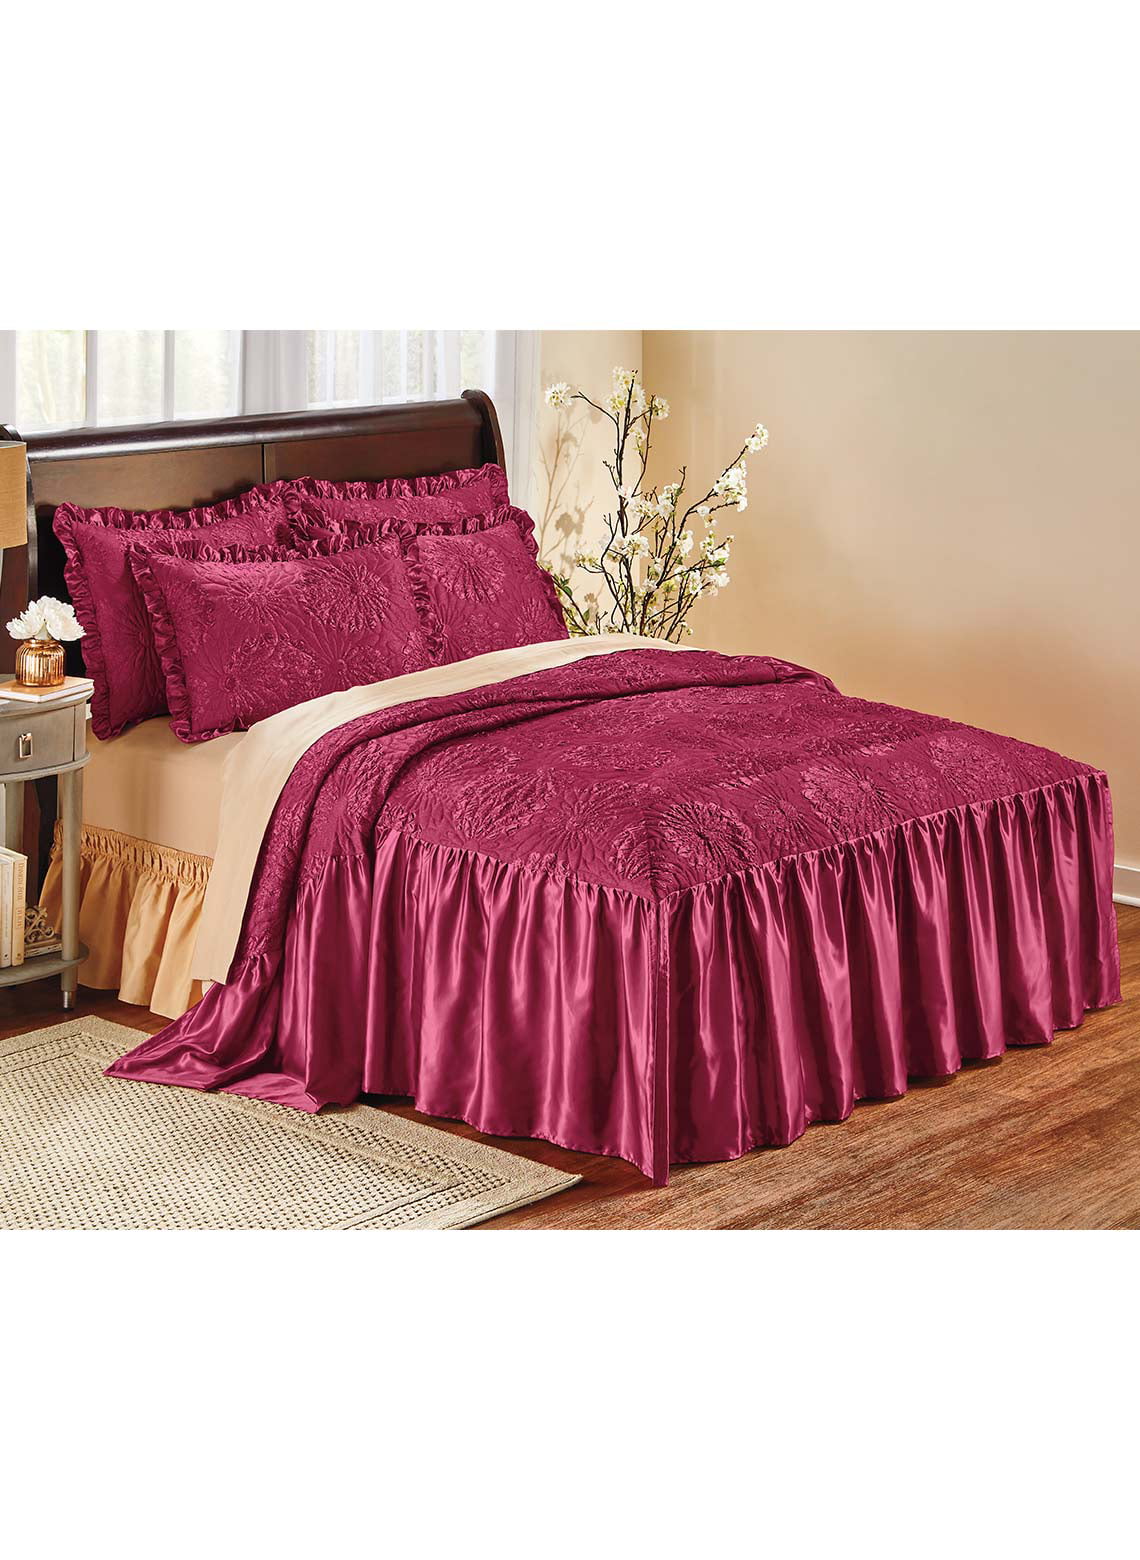 29" Drop Dust Ruffle Quilted Bed Spread with Pillow sham 800 TC Egyptian Cotton